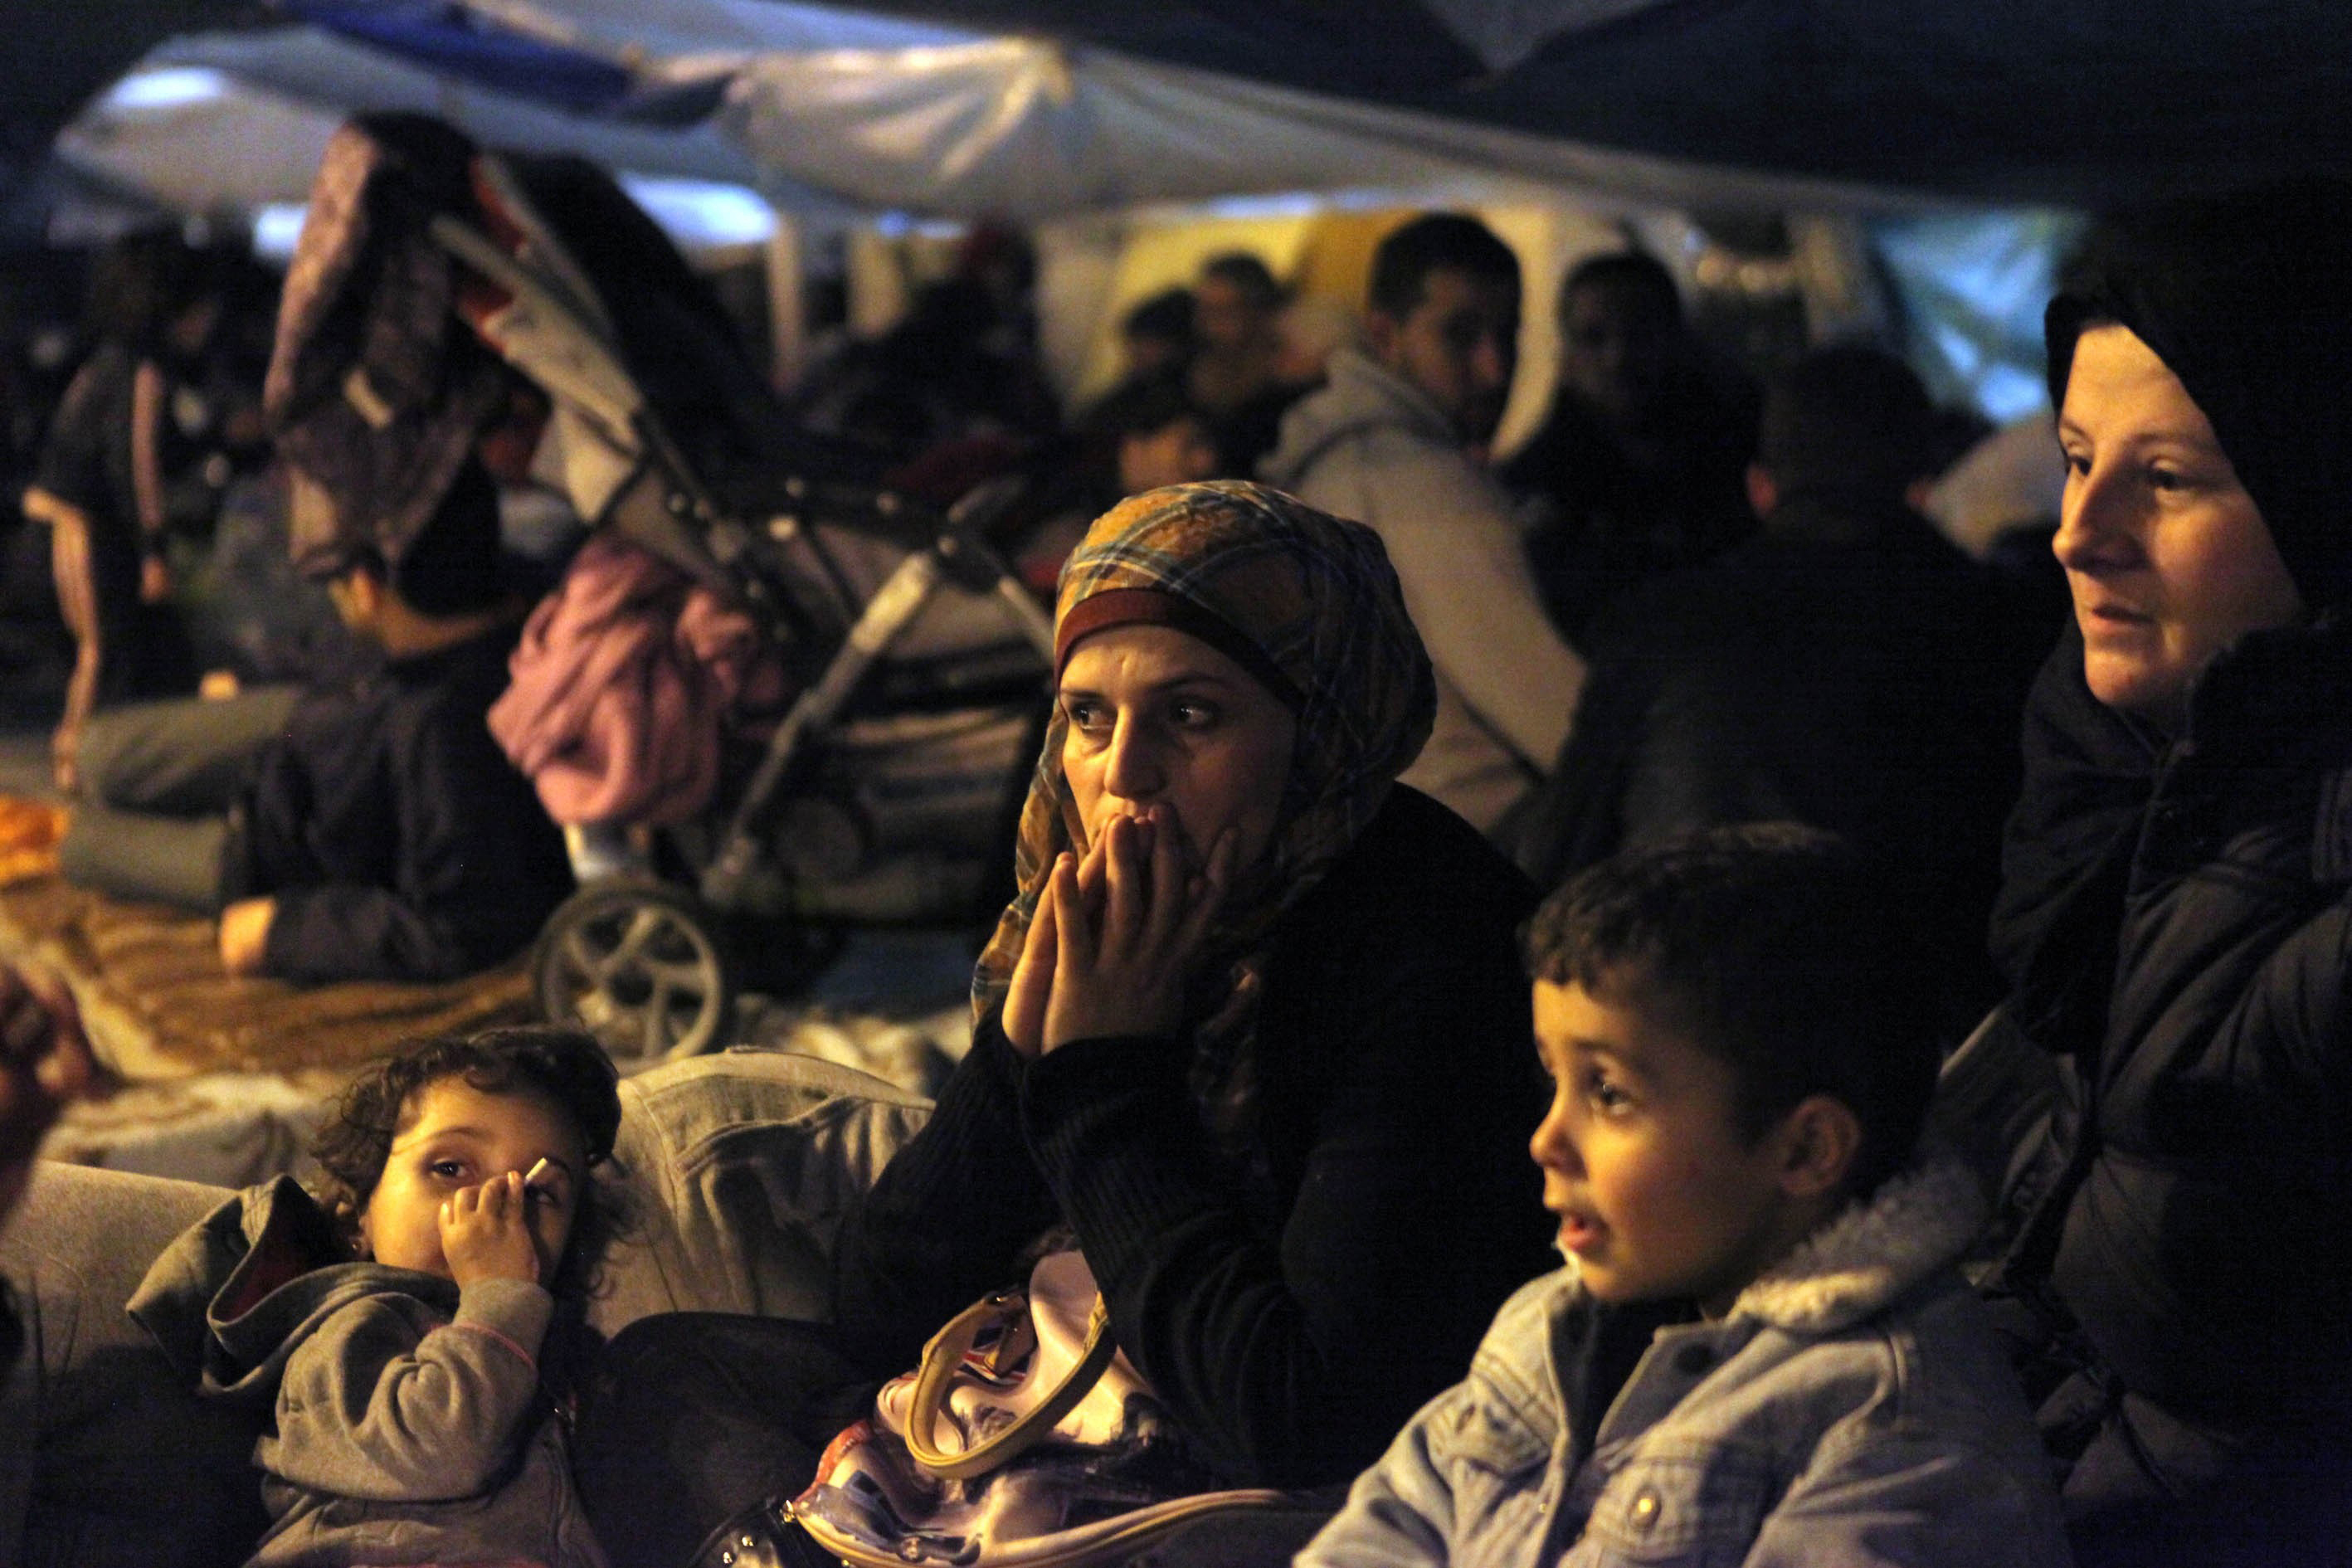 Syrian refugees wait in tents during a hunger strike outside the parliamentary building in Athens on Nov. 30, 2014 (Anadolu Agency—Getty Images)